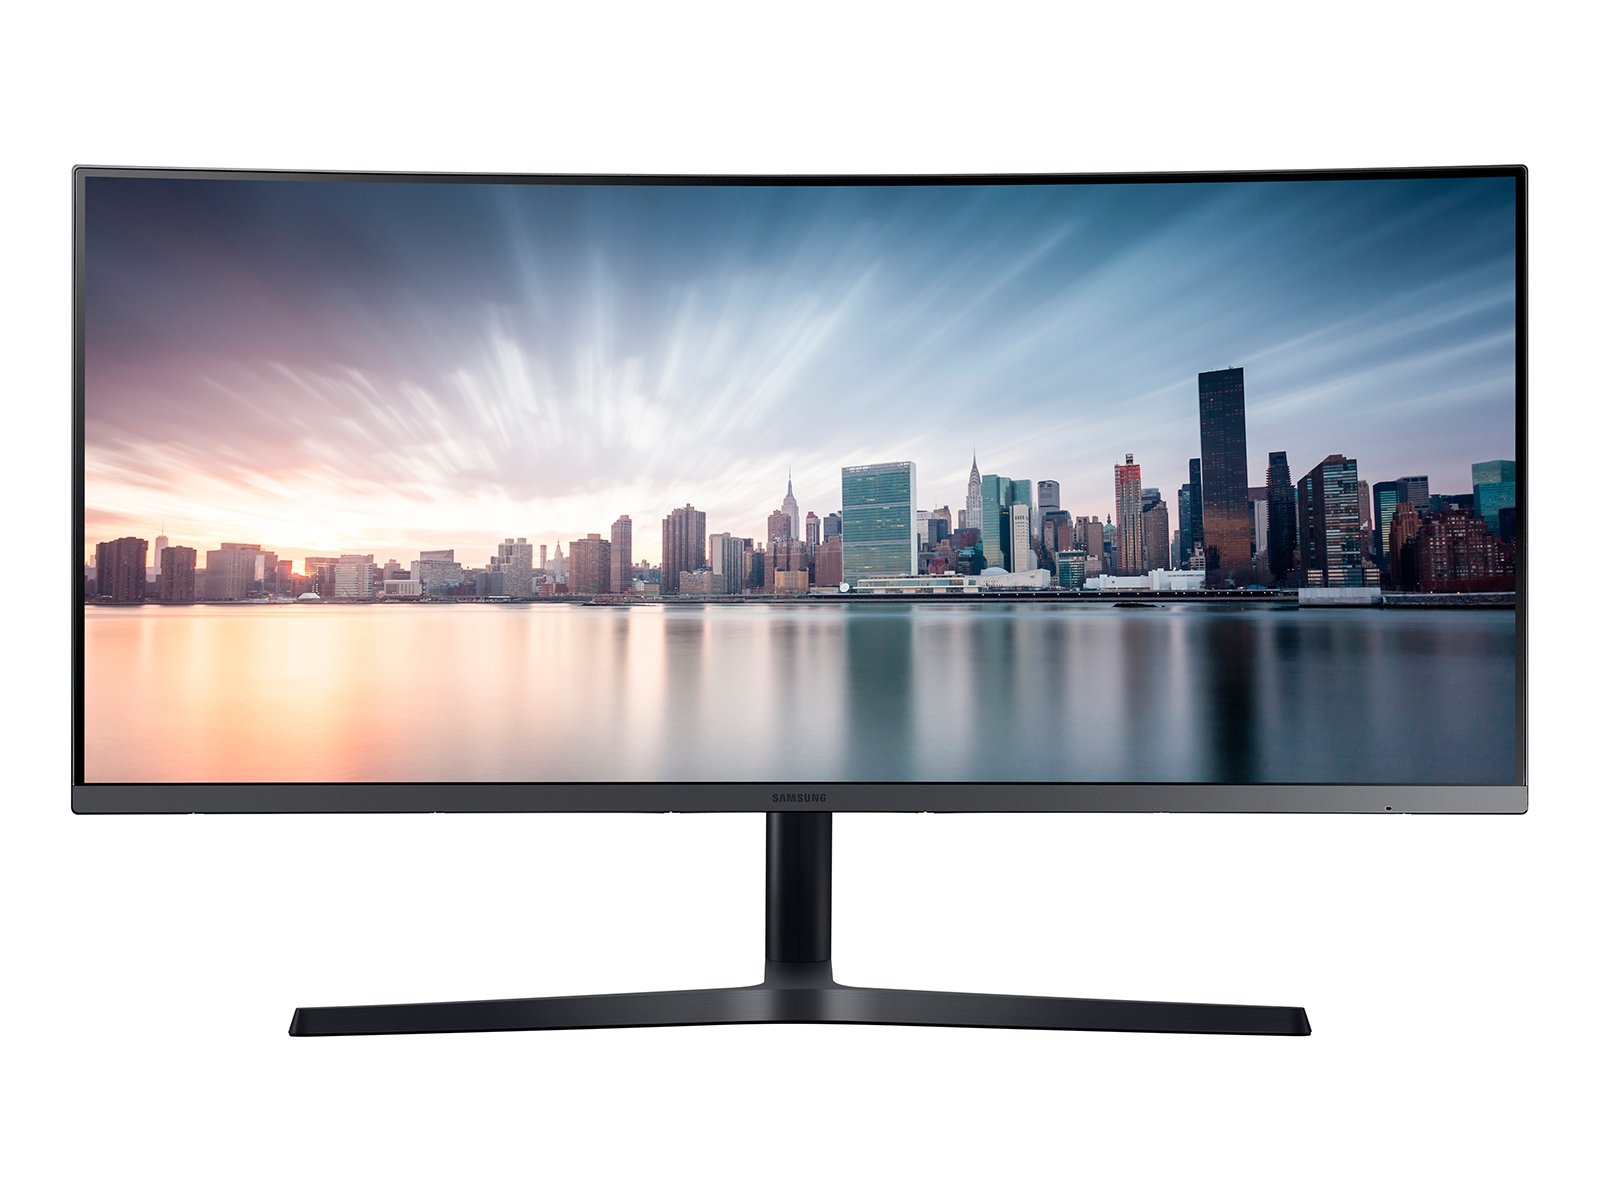 fout overzien Miniatuur 34” CH890 Curved Widescreen Monitor Monitors - LC34H890WJNXZA | Samsung US